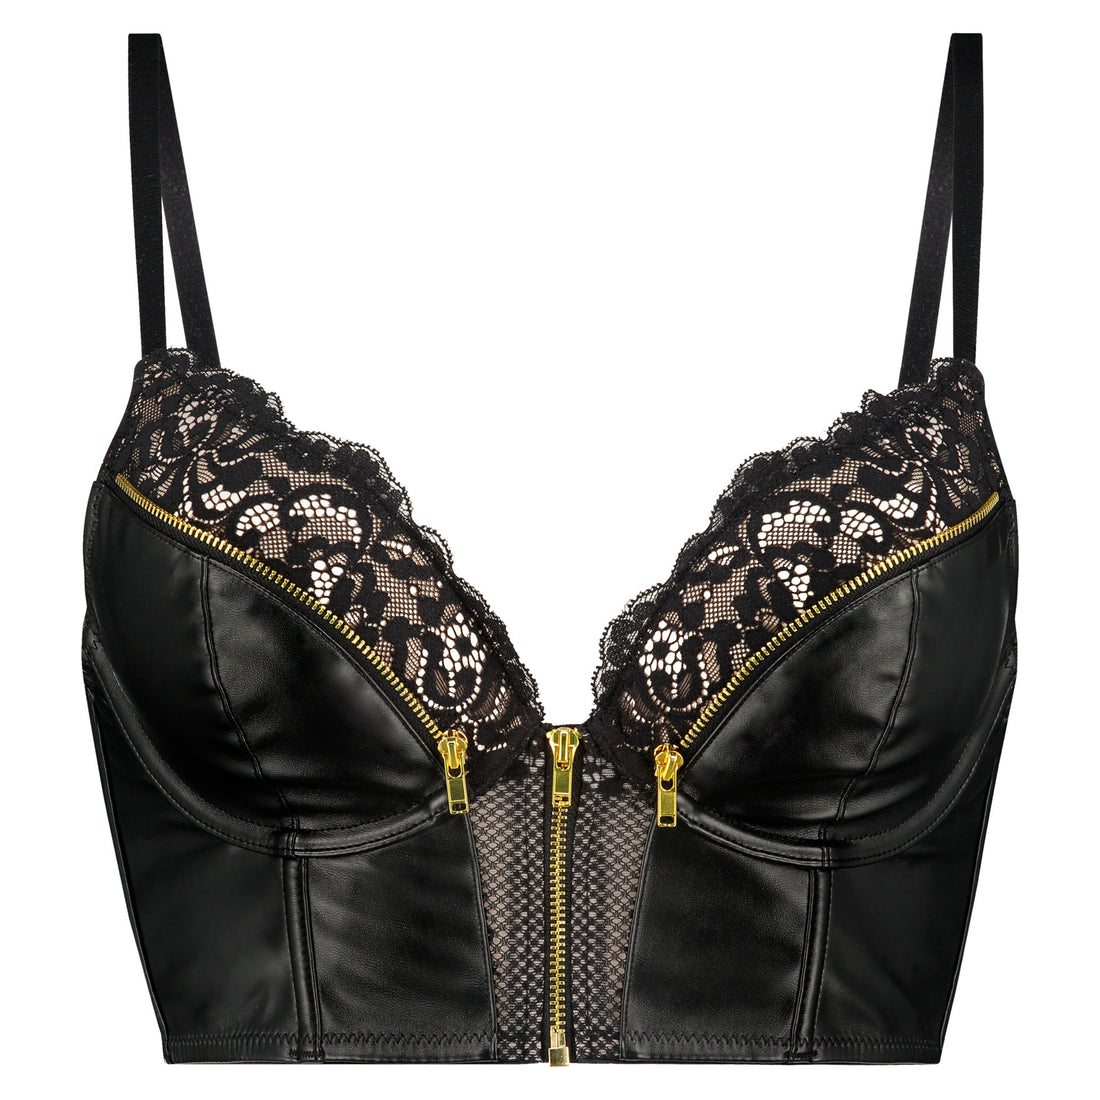 Talia Bustier Bra With Zipper In Different Cup Sizes_134475_Black_01